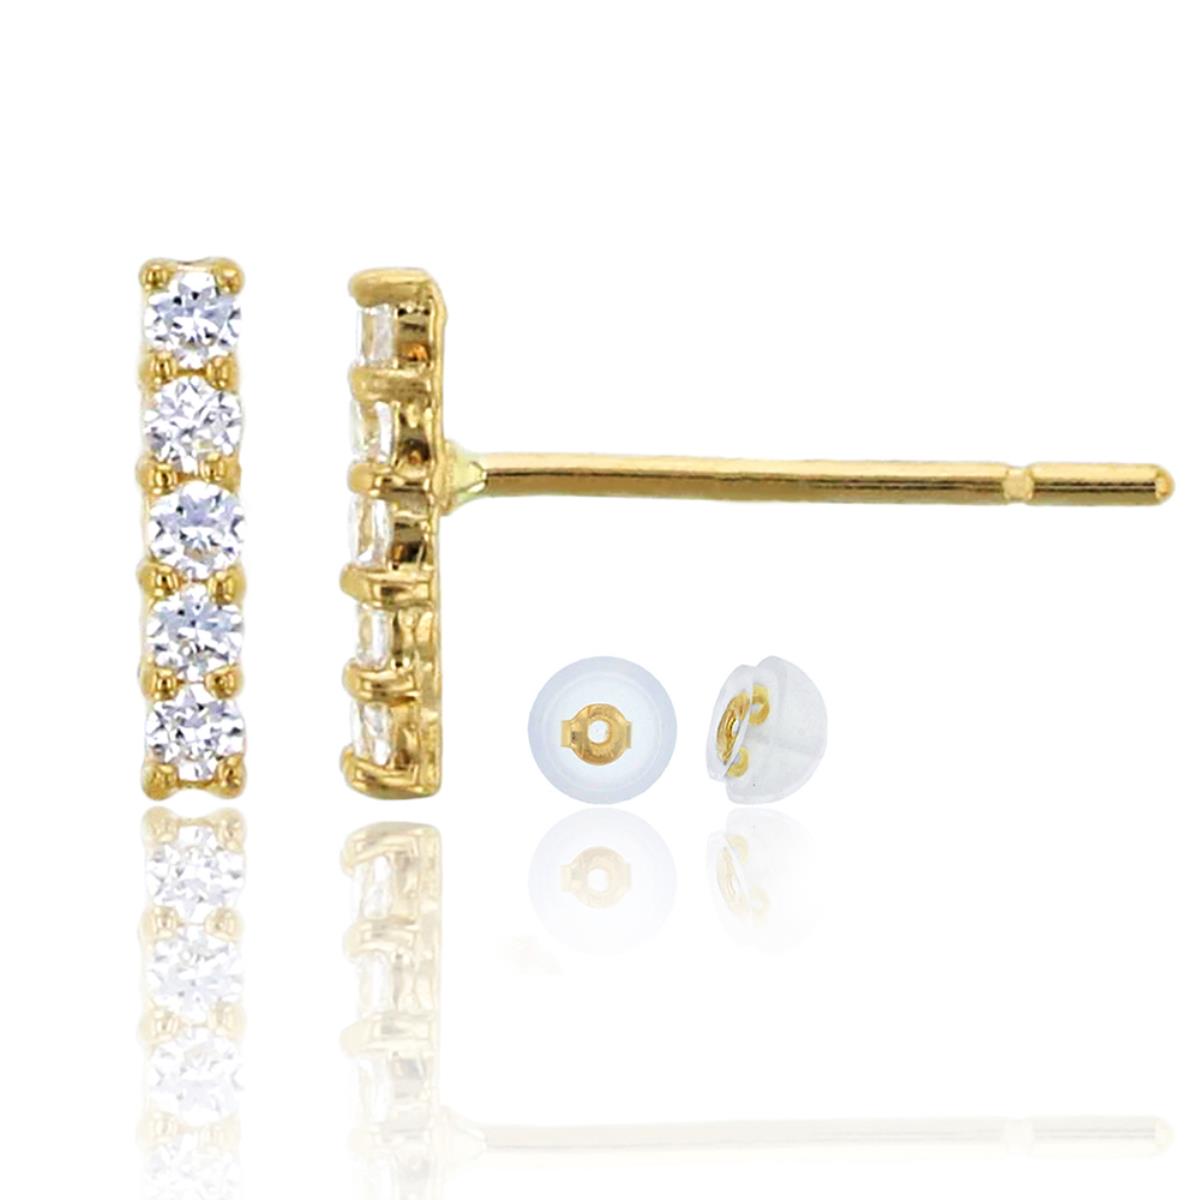 10K Yellow Gold Pave 5-Stone Liner Stud Earring & 10K Silicone Back